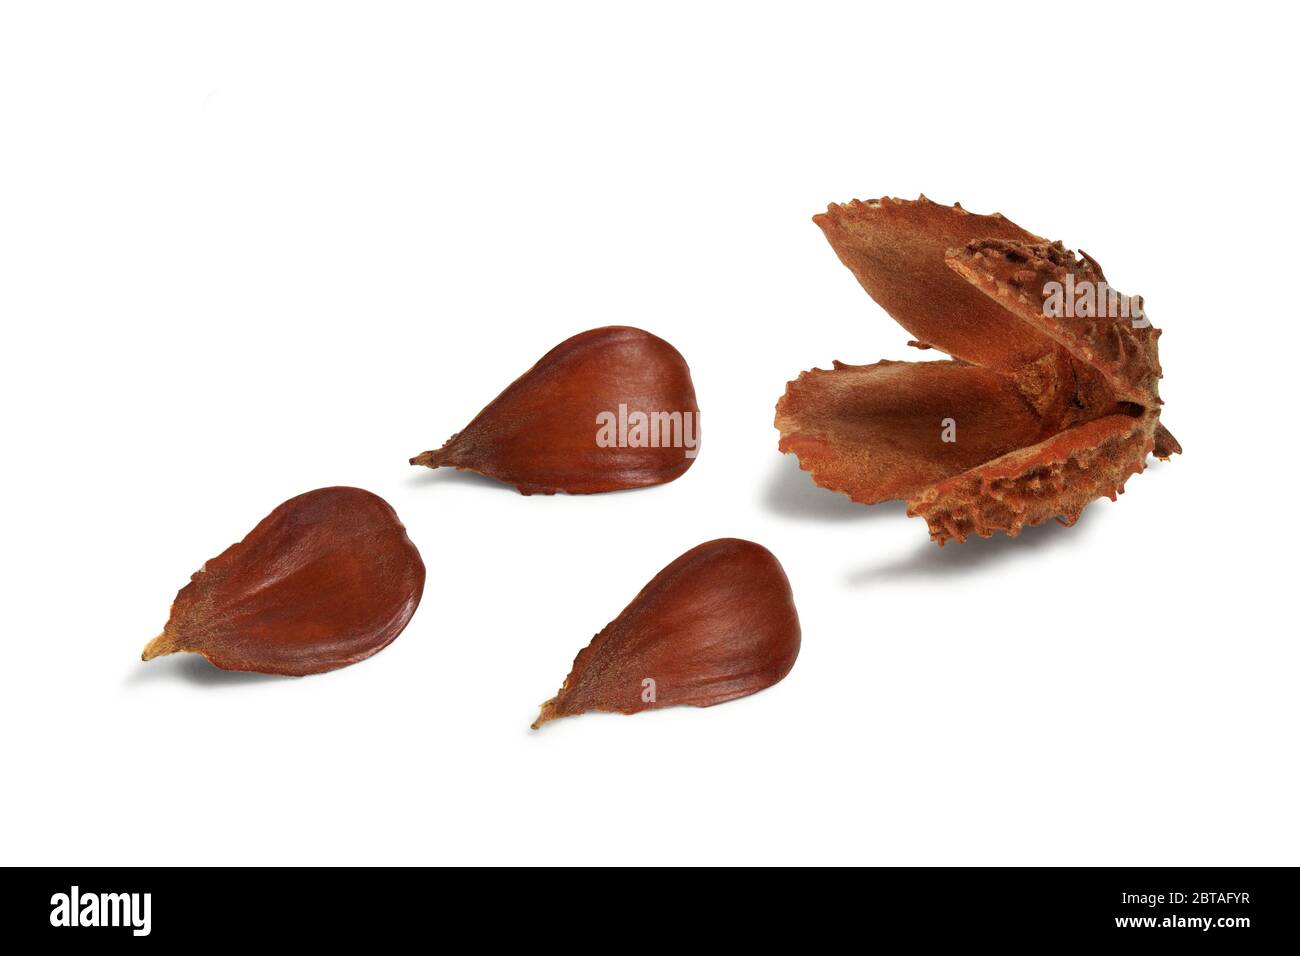 Nuts of common beech tree isolated on white background Stock Photo